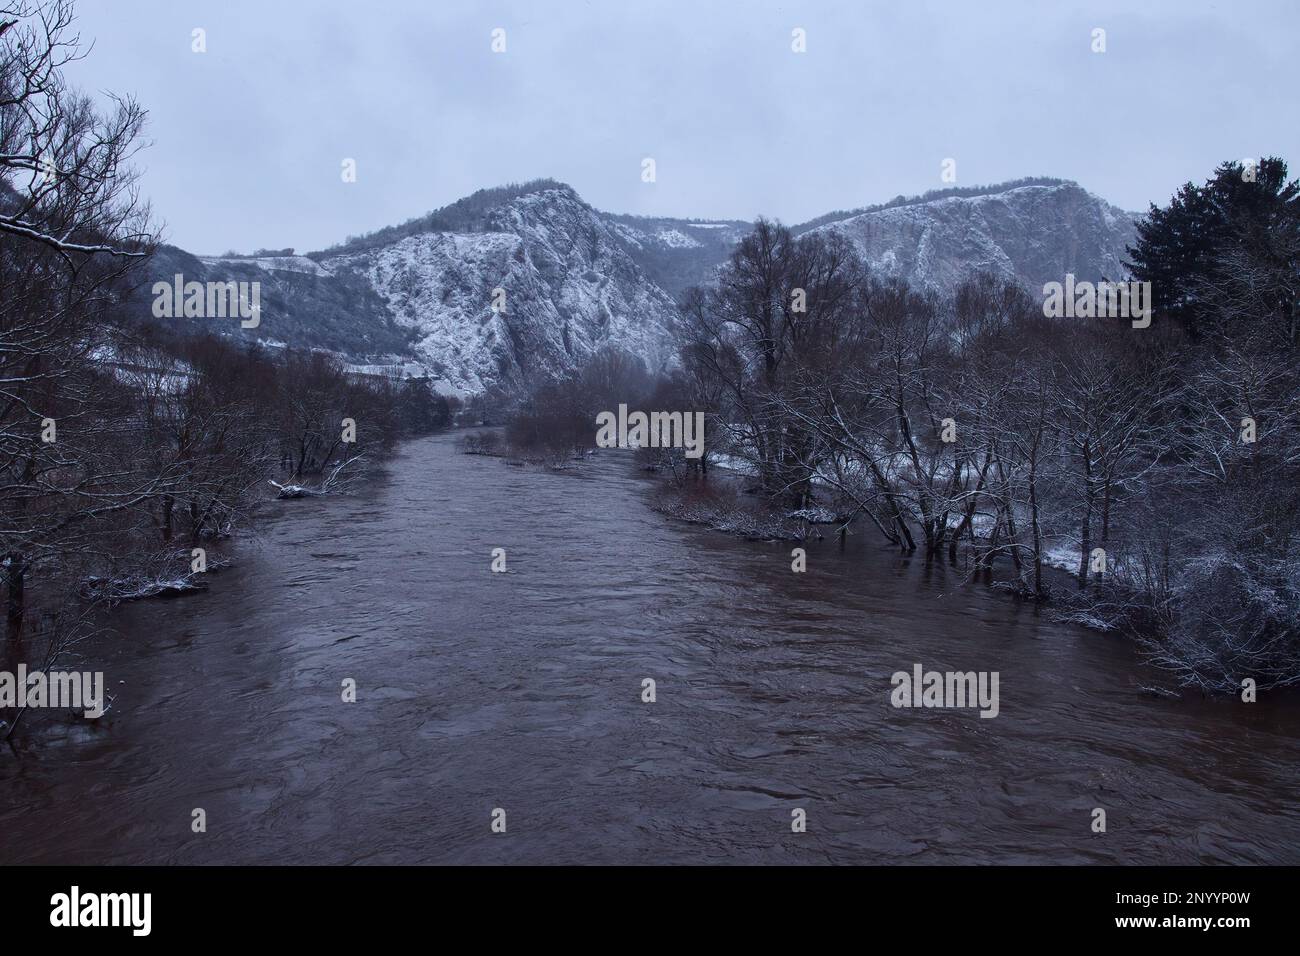 Nahe River surrounded by tree with Rotenfels mountains in the background on a dark, grey, snowy winter day in Rhineland Palatinate, Germany. Stock Photo